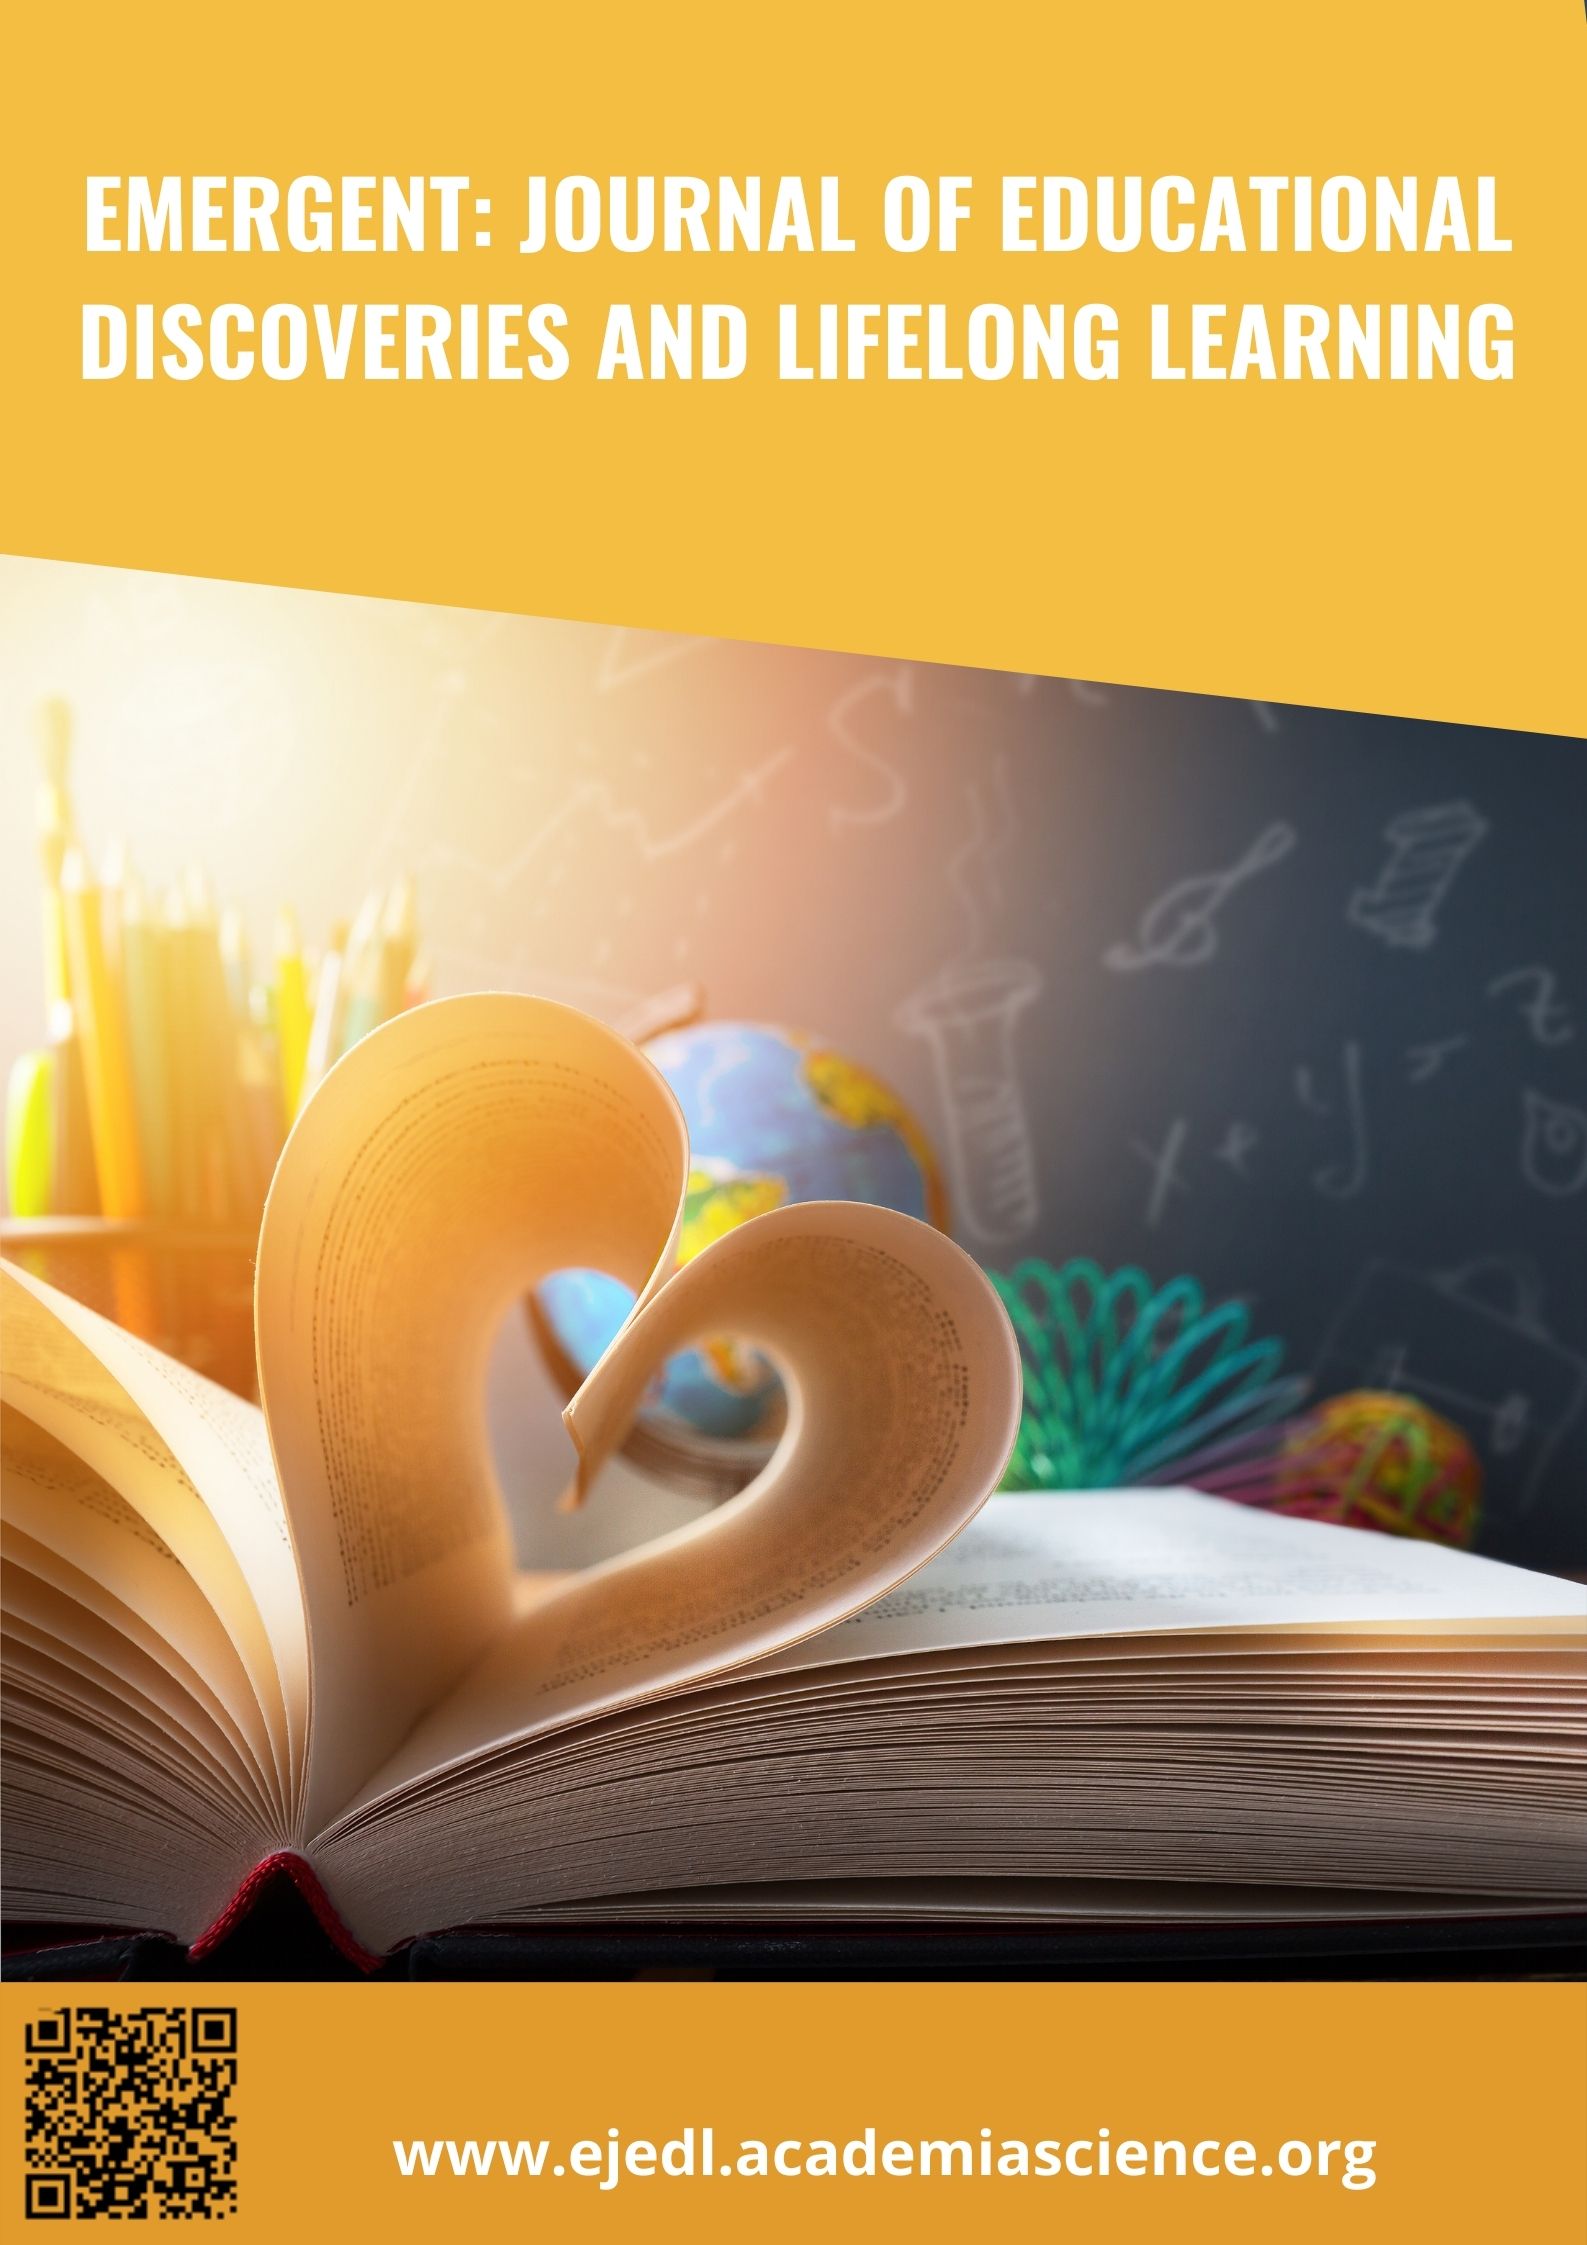 Emergent: Journal of Educational Discoveries and Lifelong Learning (EJEDL)